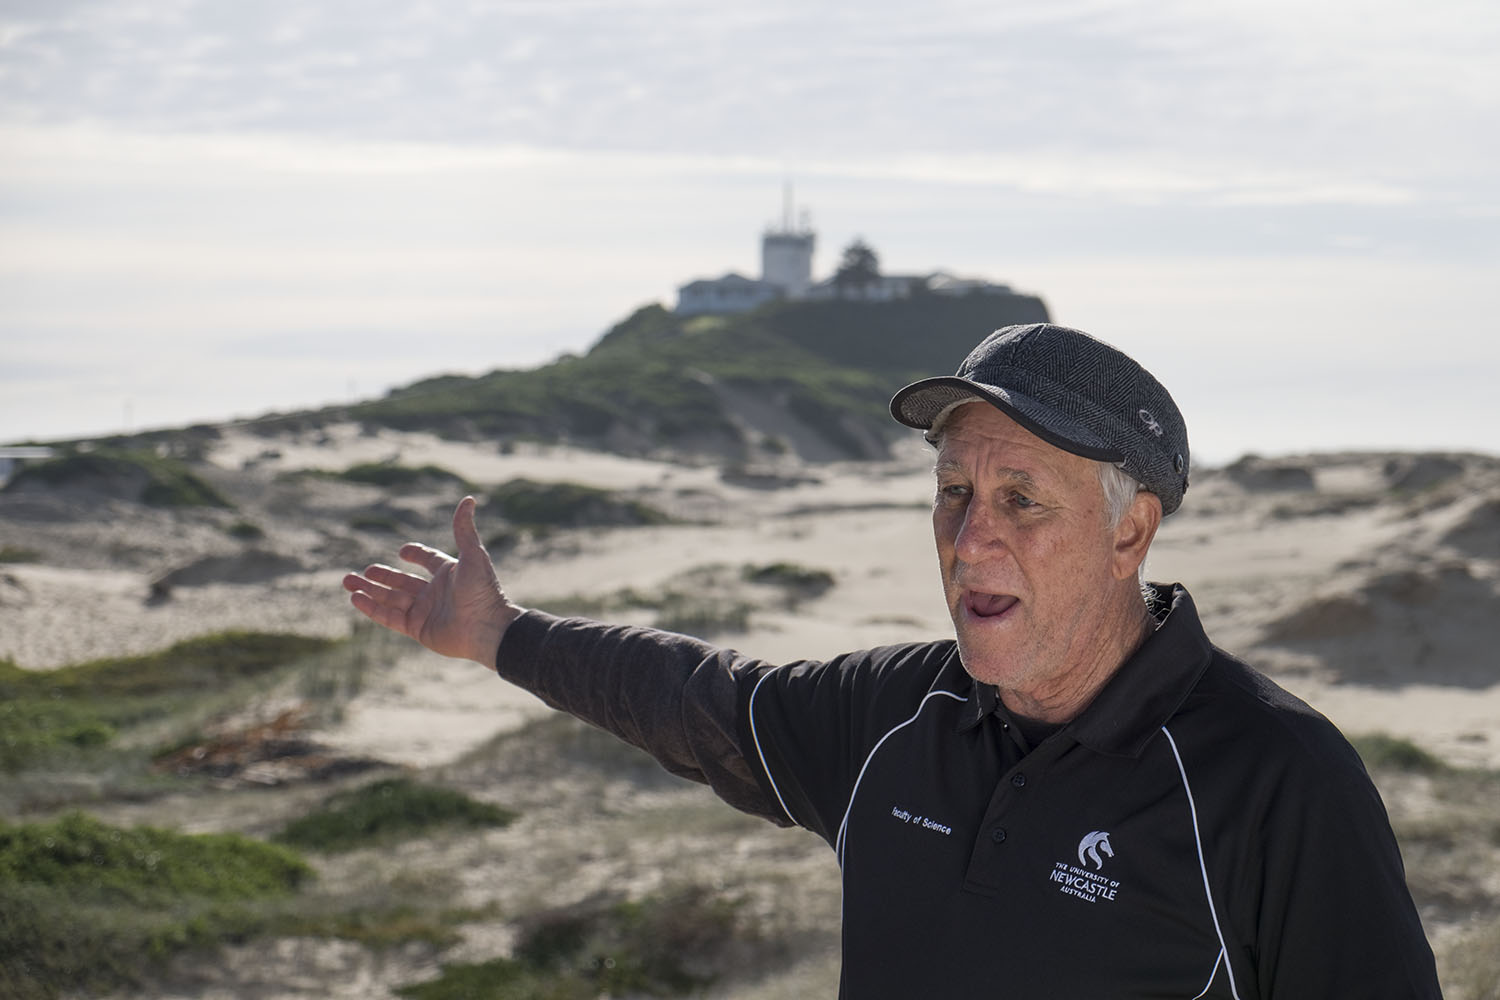 Professor Ron Boyd on Nobby's beach with Nobby's headland in the background